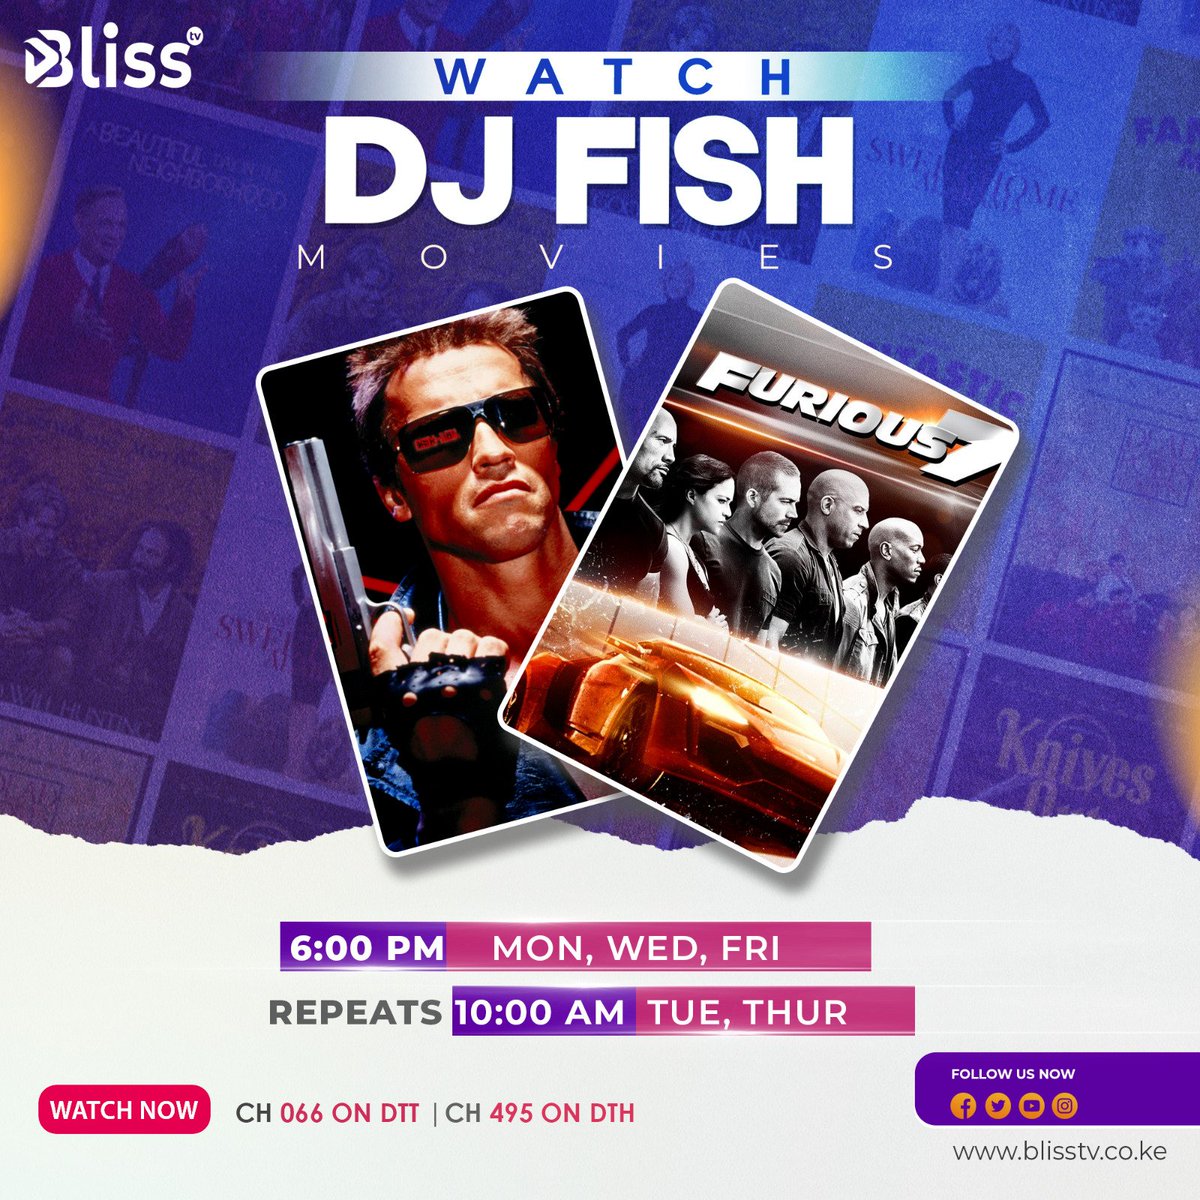 Barrrrrrabara kabisa! Pozi tena pozi zaidi tukiwaletea movies za #DJFish!

Catch all his movies pale #BlissTV  ch 66/495.

>> Subscribe to the NYOTA BOUQUET at Ksh 329 and get 1 month upgrade to basic bouquet ! Subscribe to the NOVA BOUQUET and get 1 month upgrade to Smart